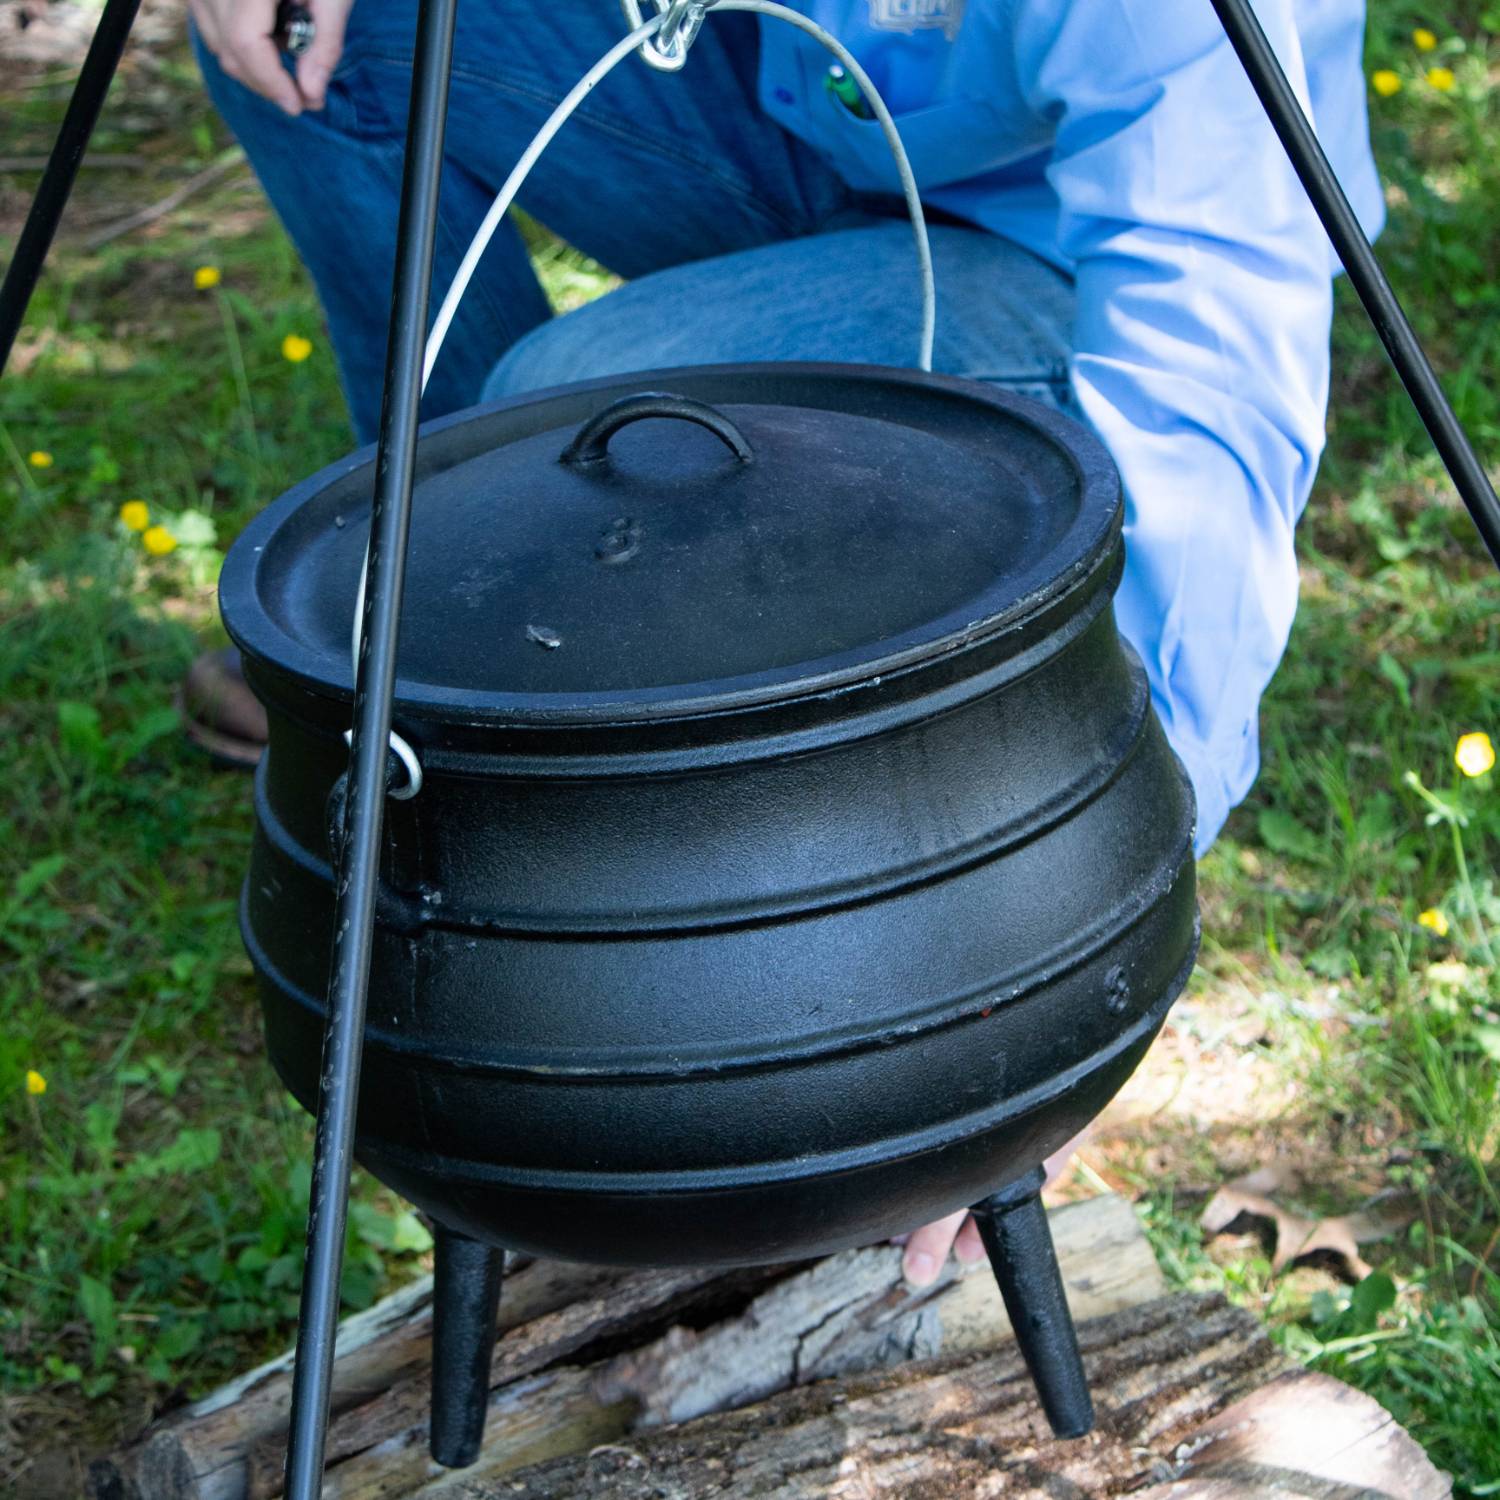 Lehman's Campfire Cooking Kettle Pot - Cast Iron Potje Dutch Oven with 3  Legs and Lid, 10.5 inch, 2 gallon 